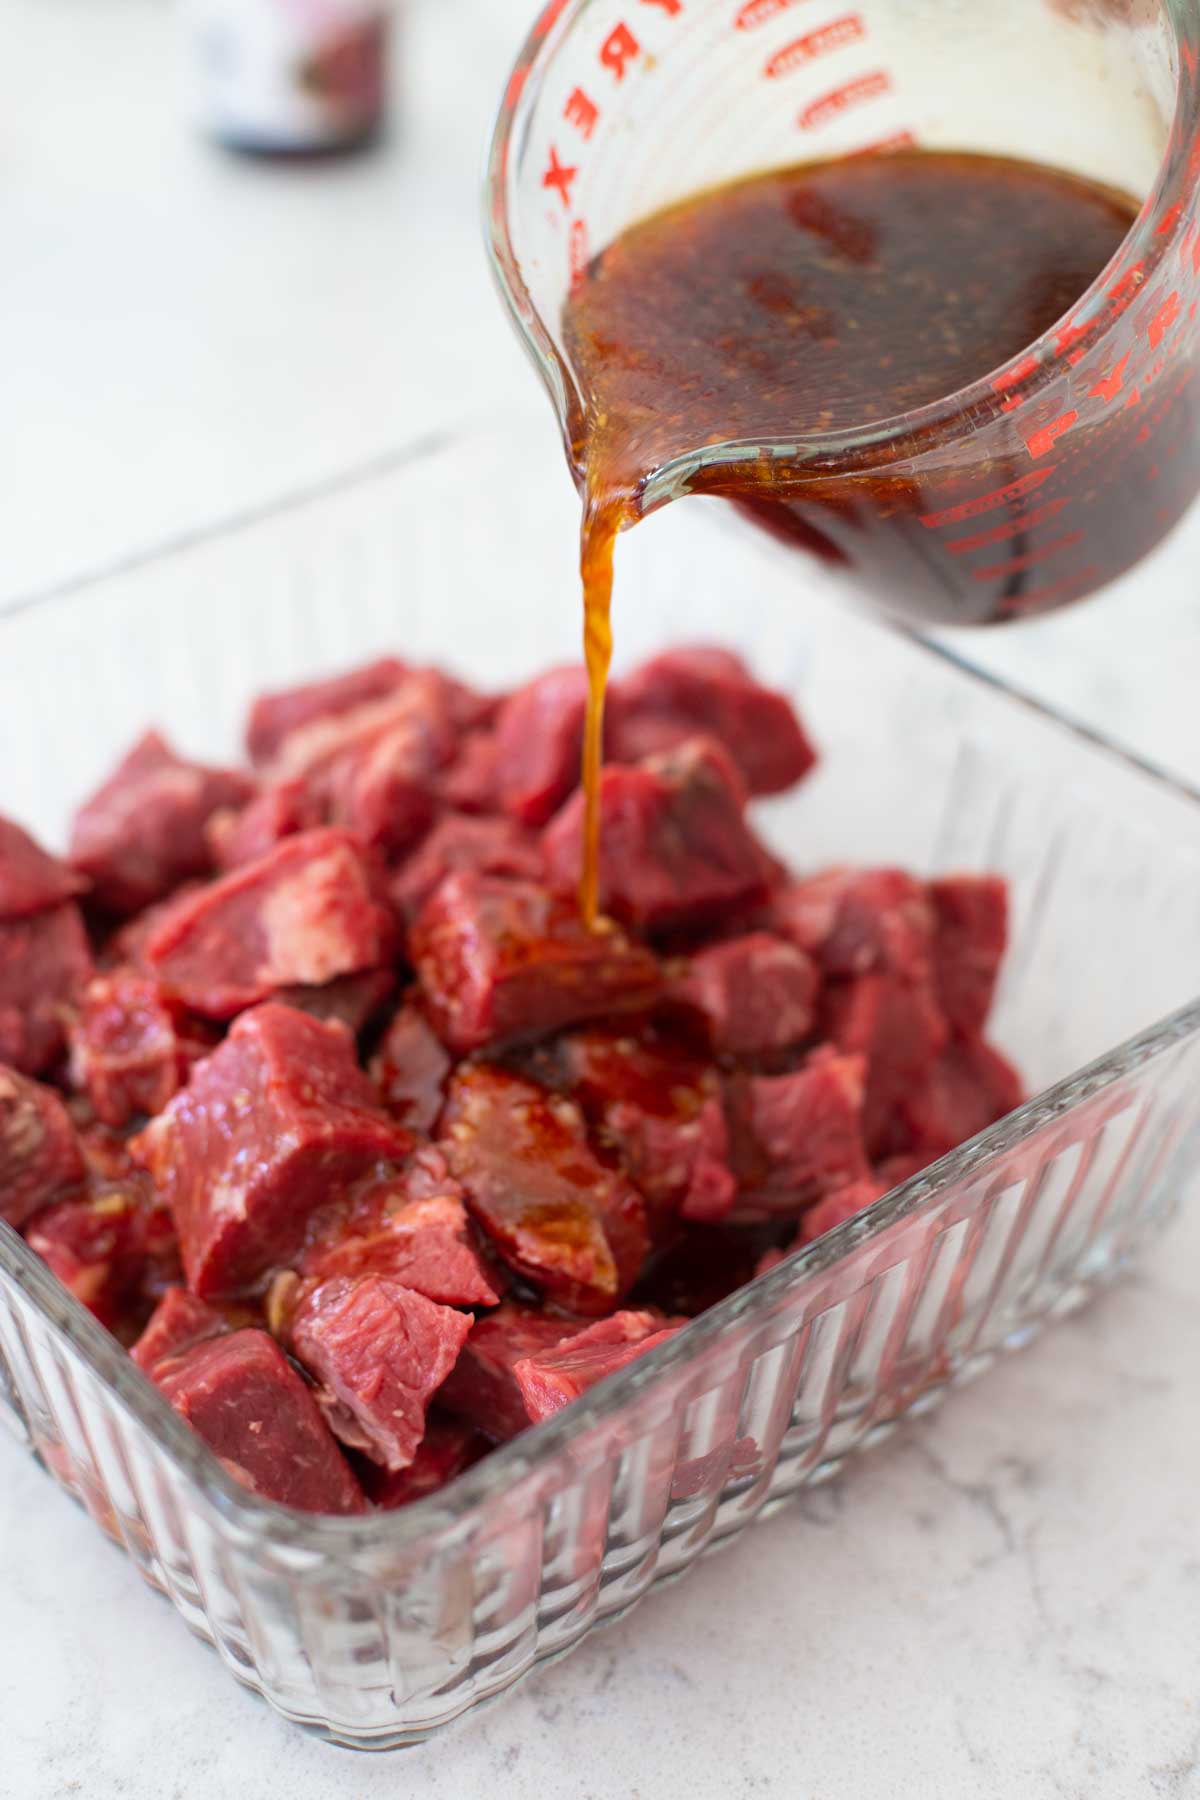 The chunks of beef are in a glass dish. The marinade is being poured over the top.